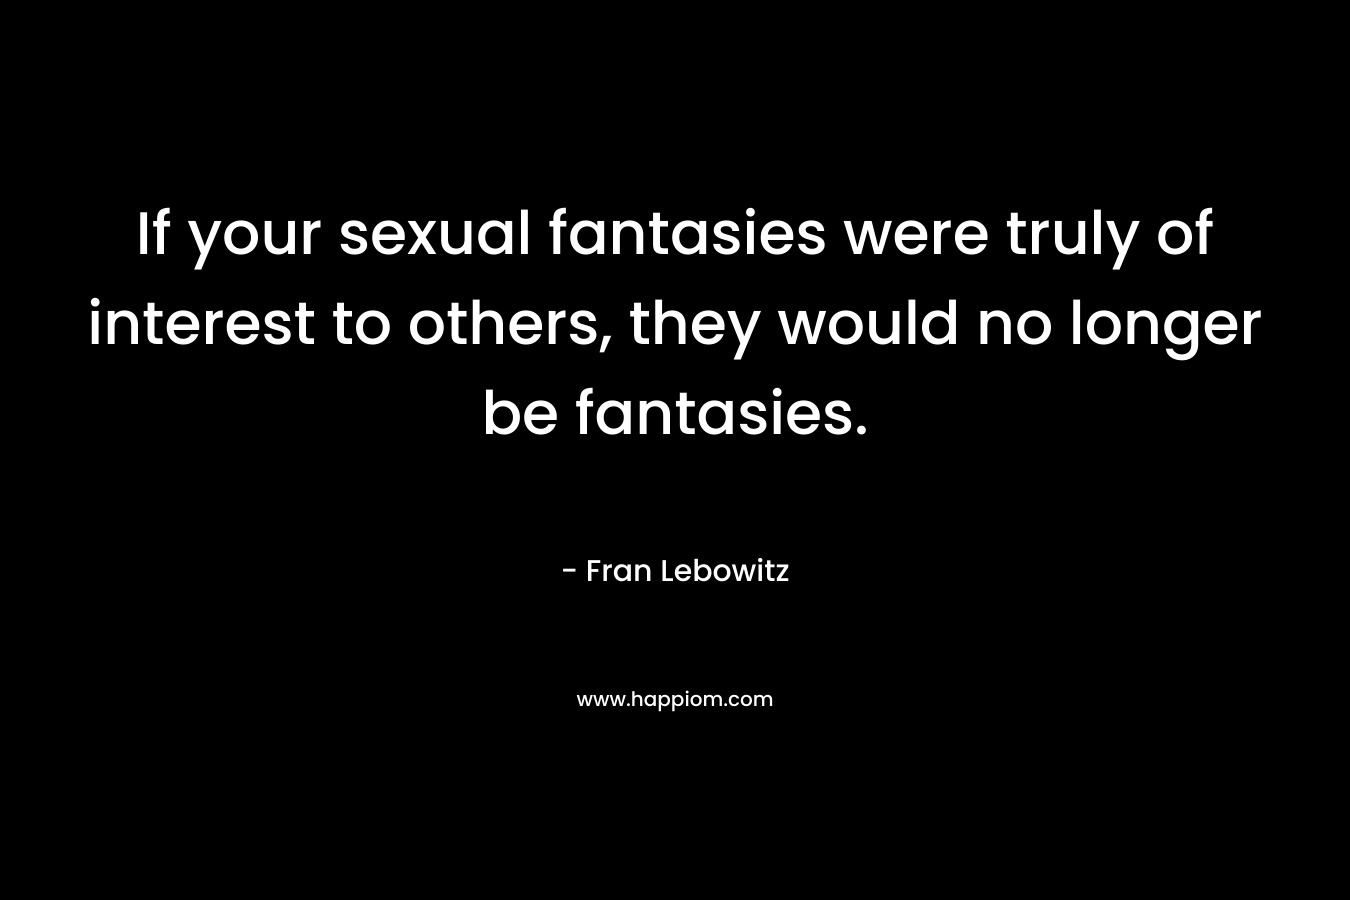 If your sexual fantasies were truly of interest to others, they would no longer be fantasies.